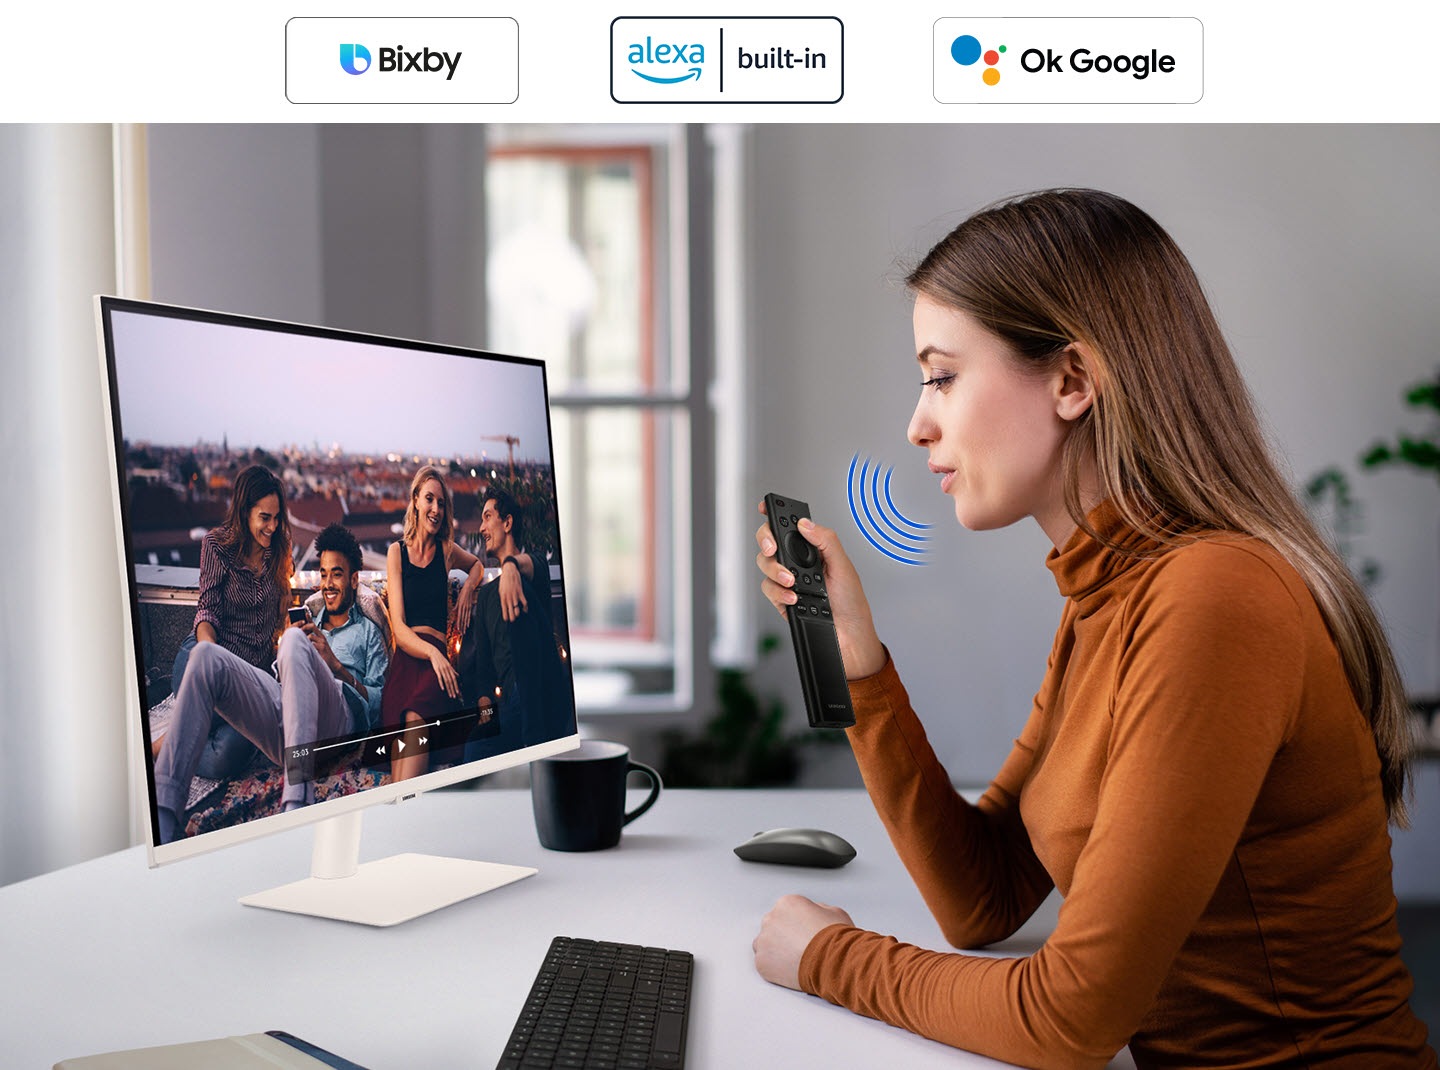 A woman speaks to the monitor. And a video is played on it. The Bixby and SmartThings icon is in the right corner.